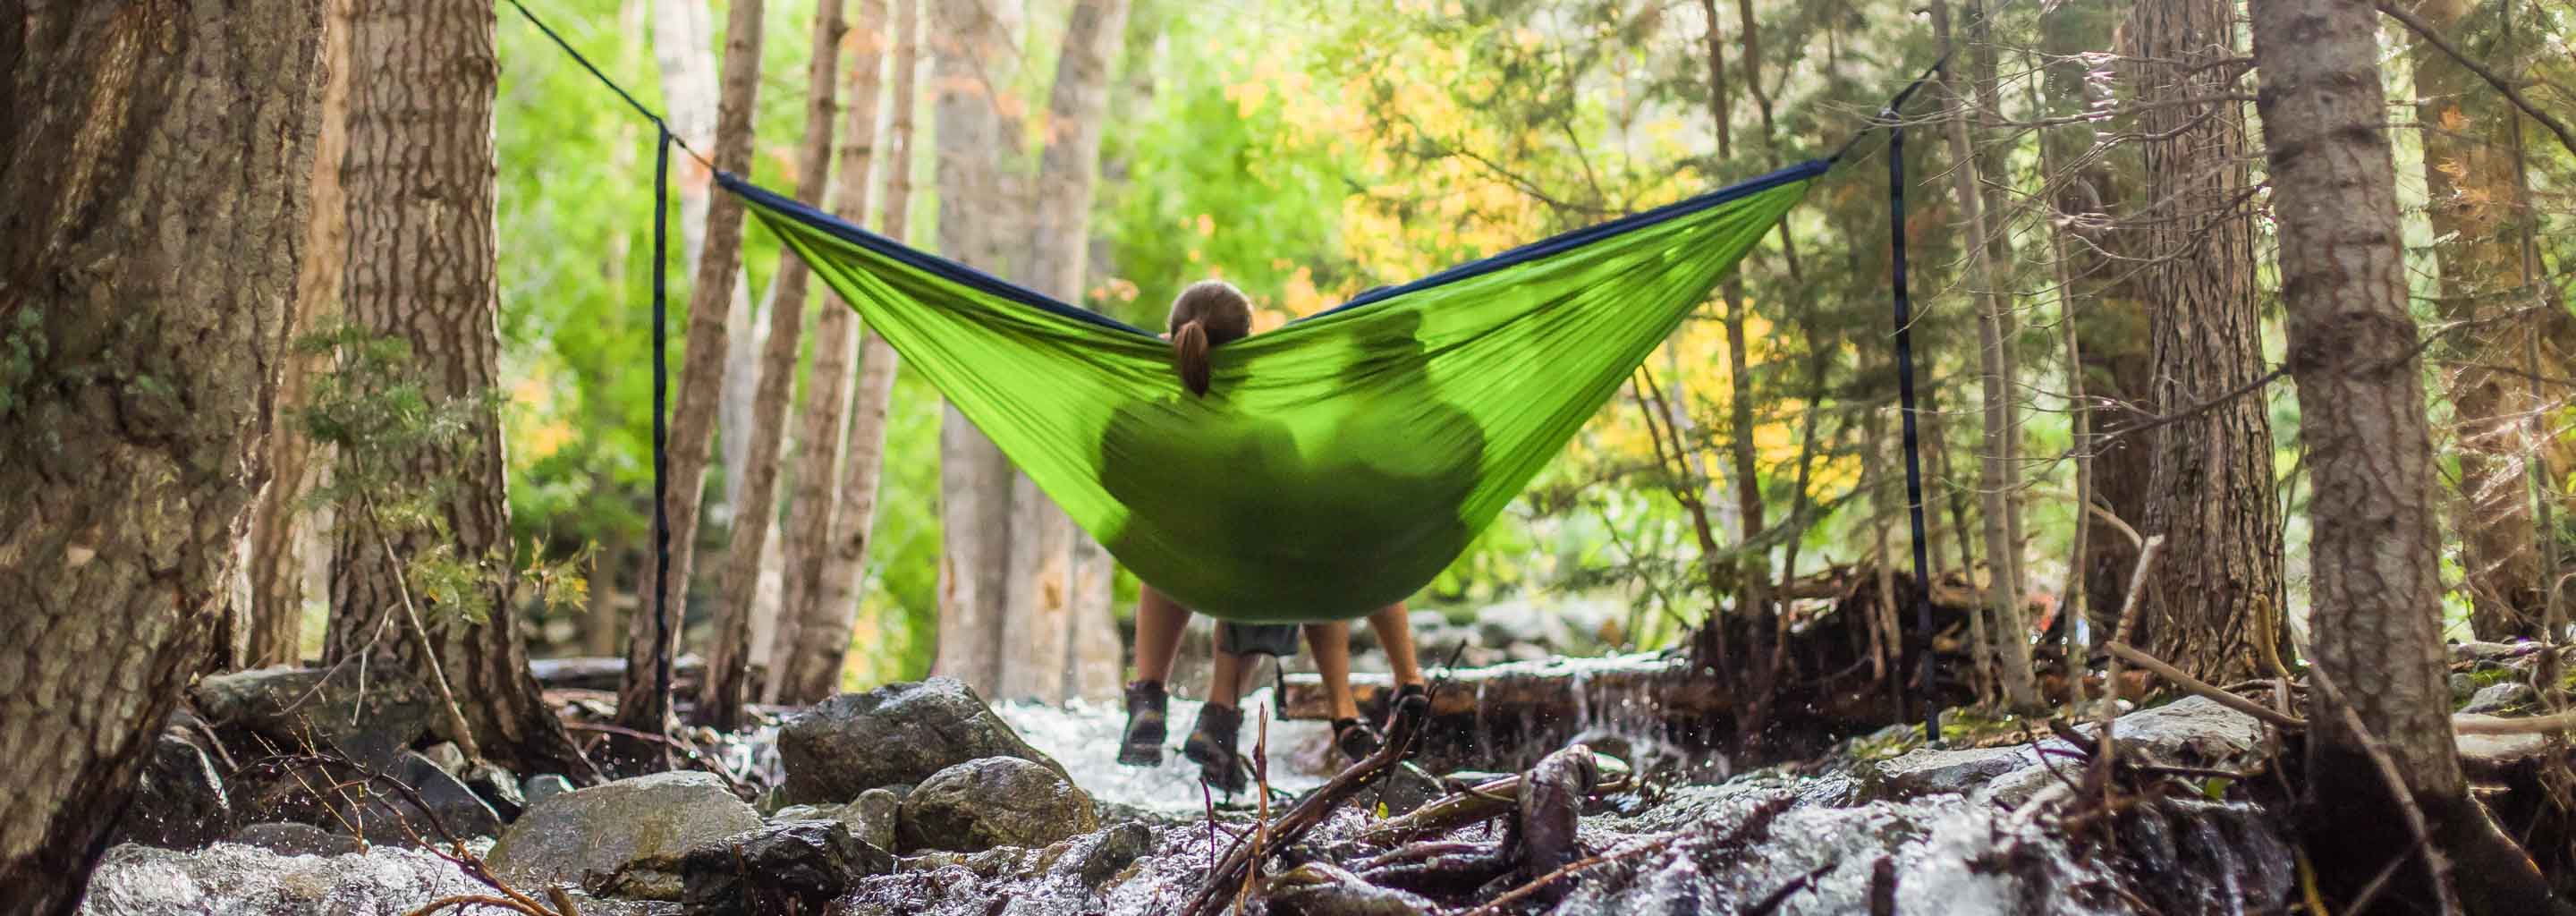 Campers lounge in a hammock above a stream